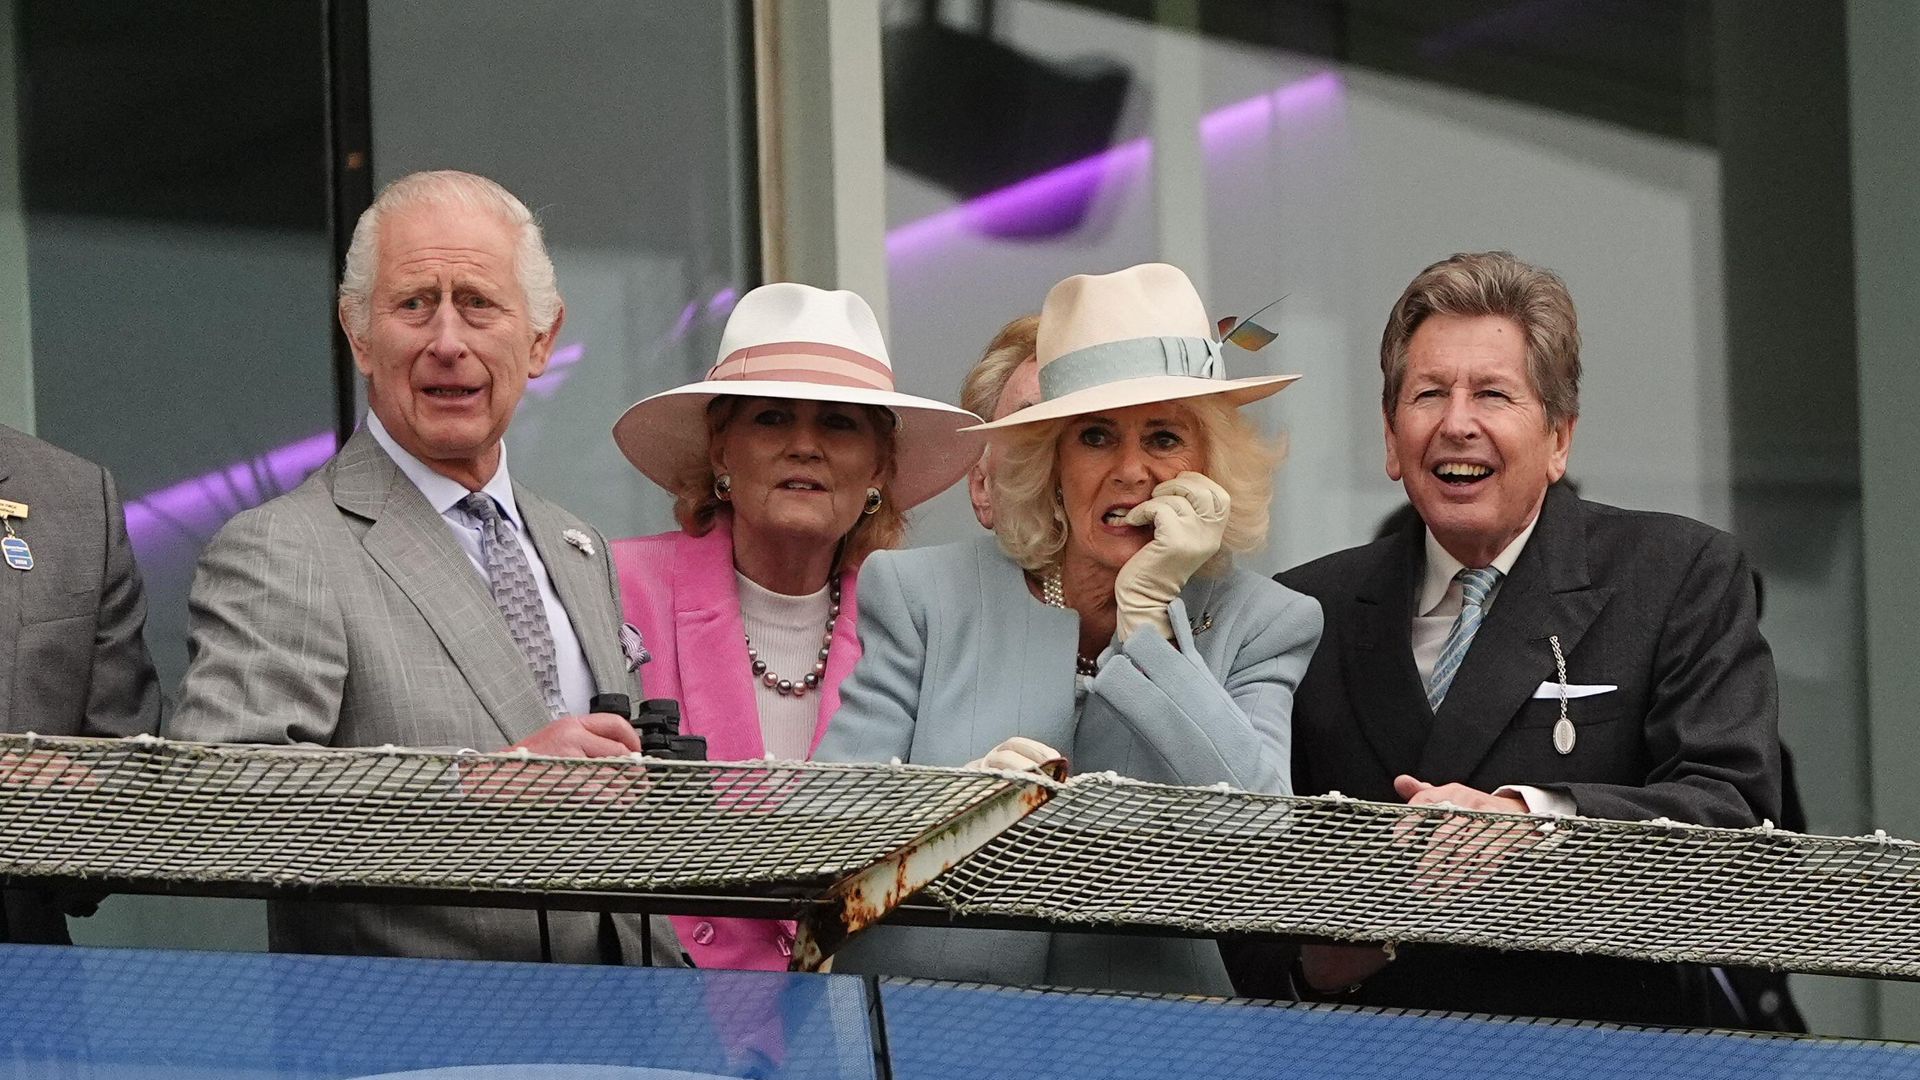 King Charles and Queen Camilla watching horse racing with Camilla biting her nails